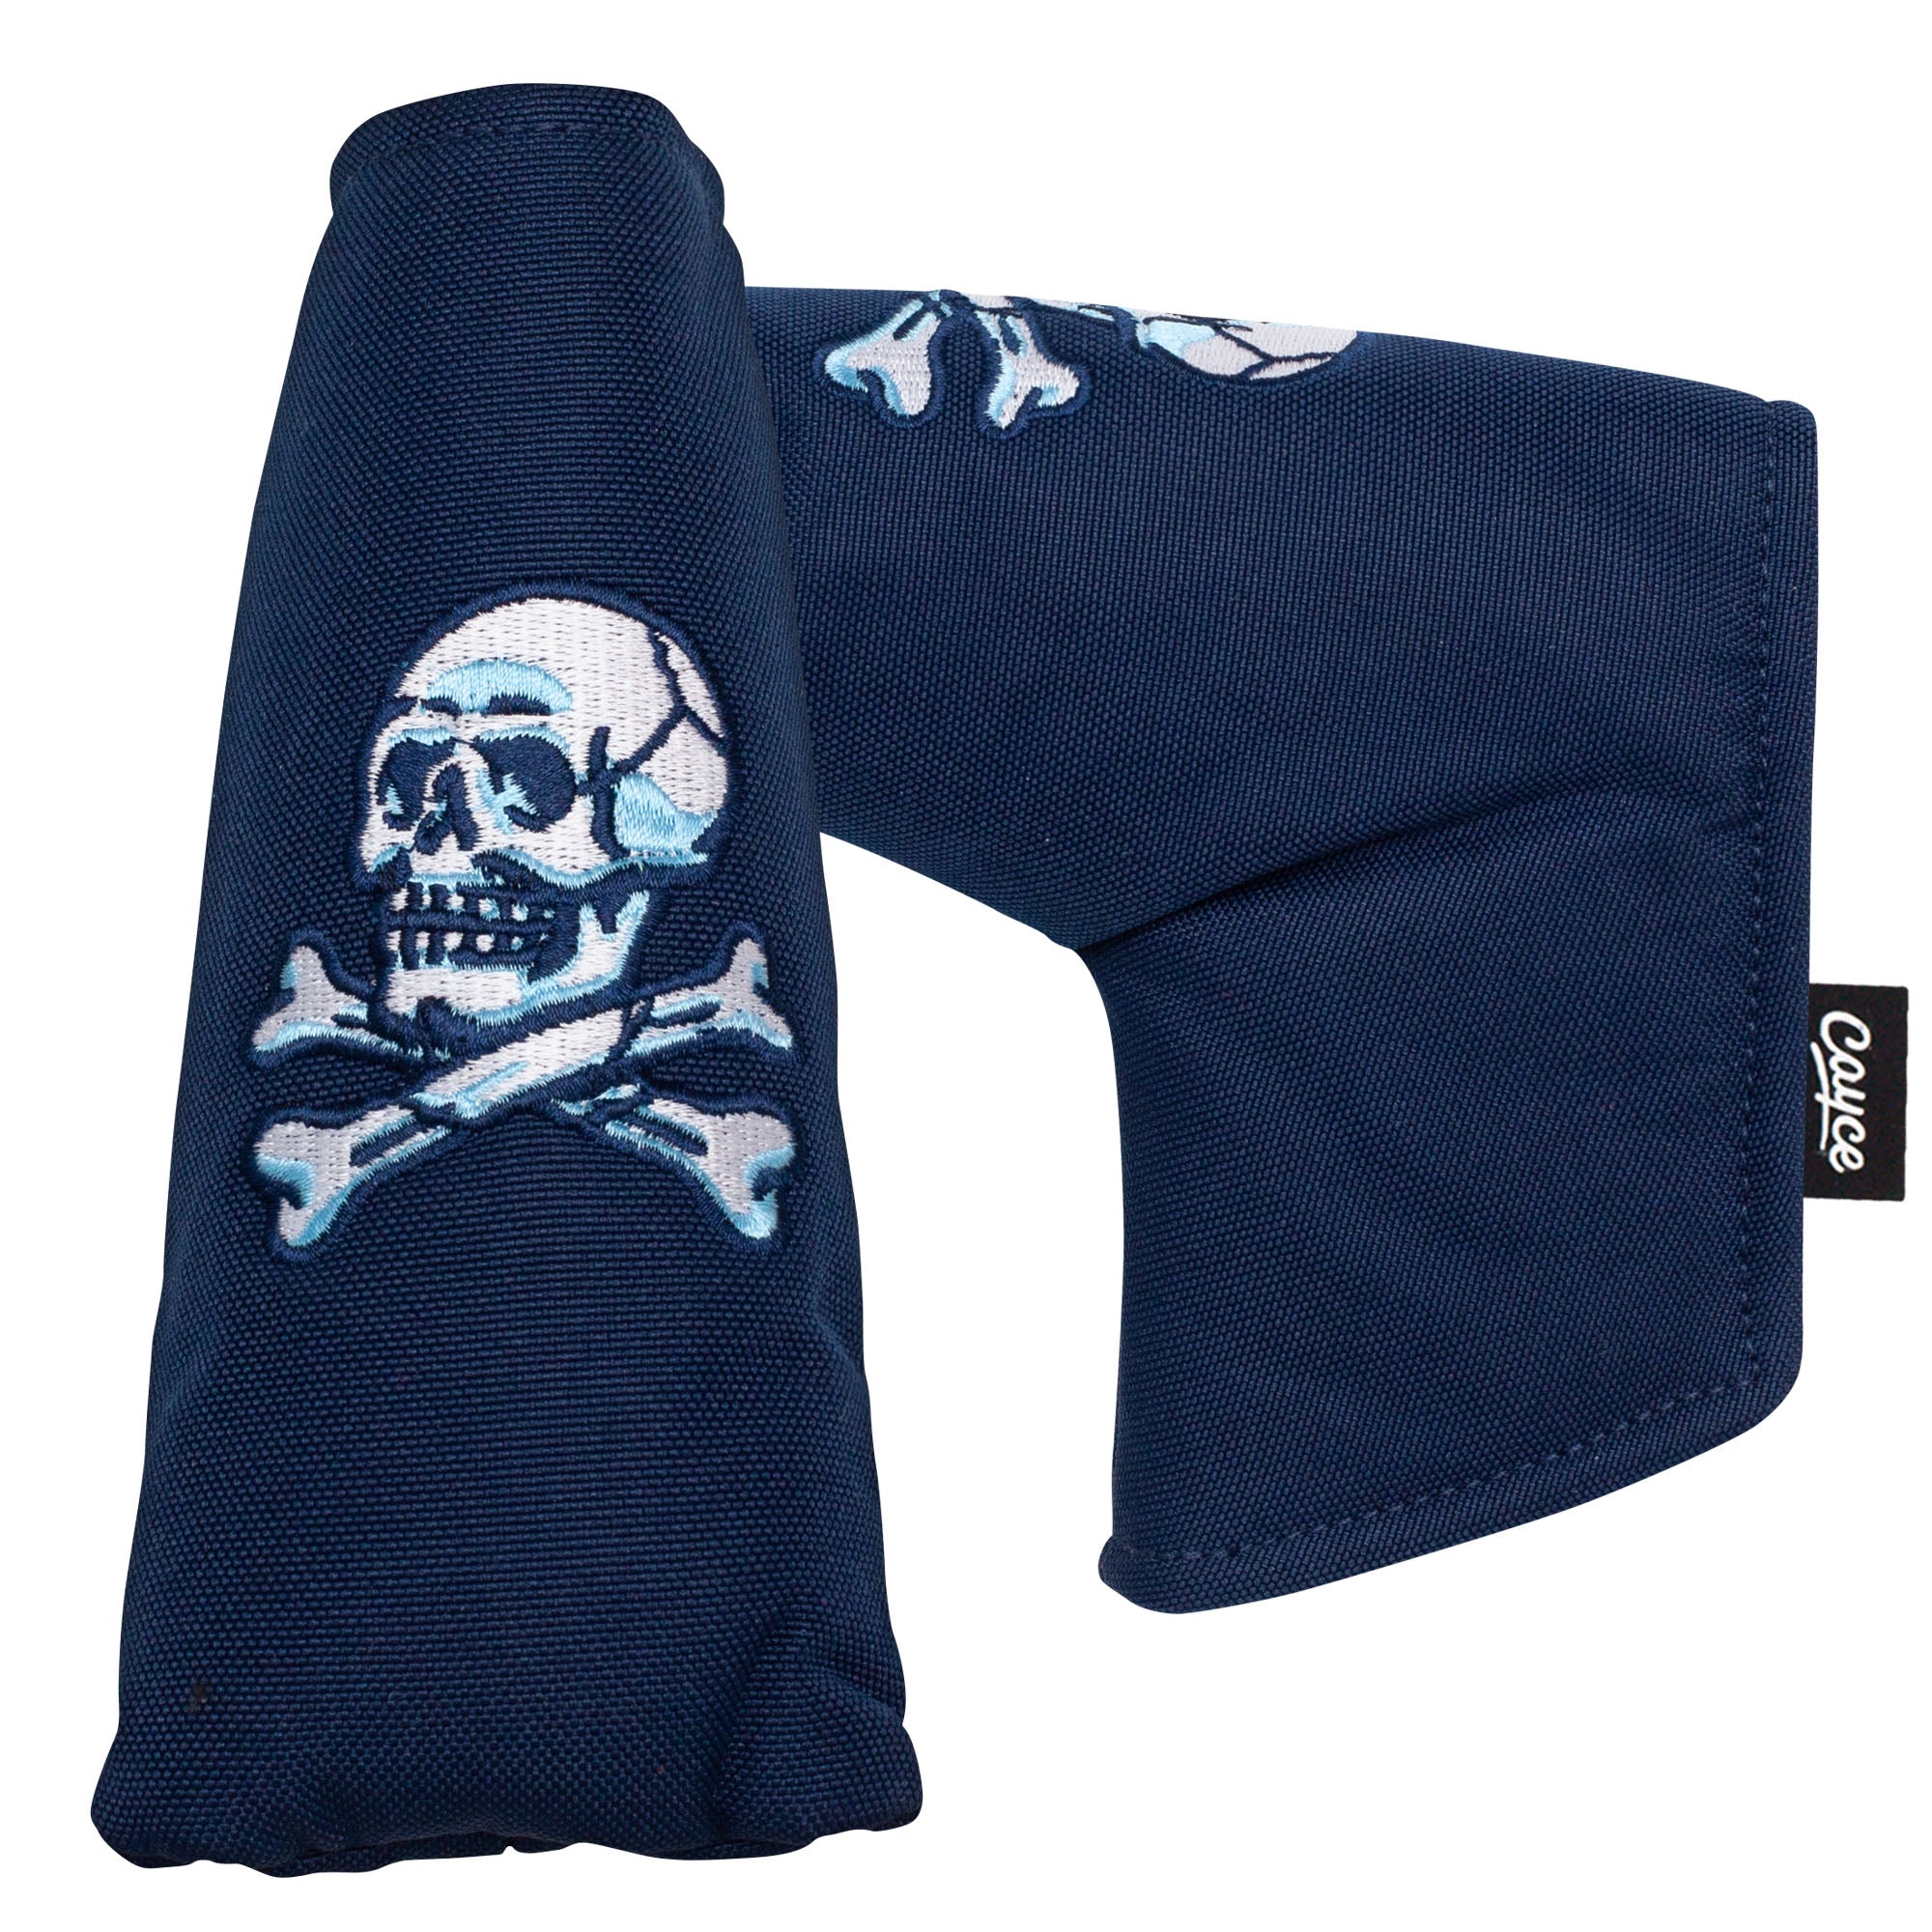 A navy magnetic blade putter cover with an embroidered skull and crossbones logo from Cayce Golf.